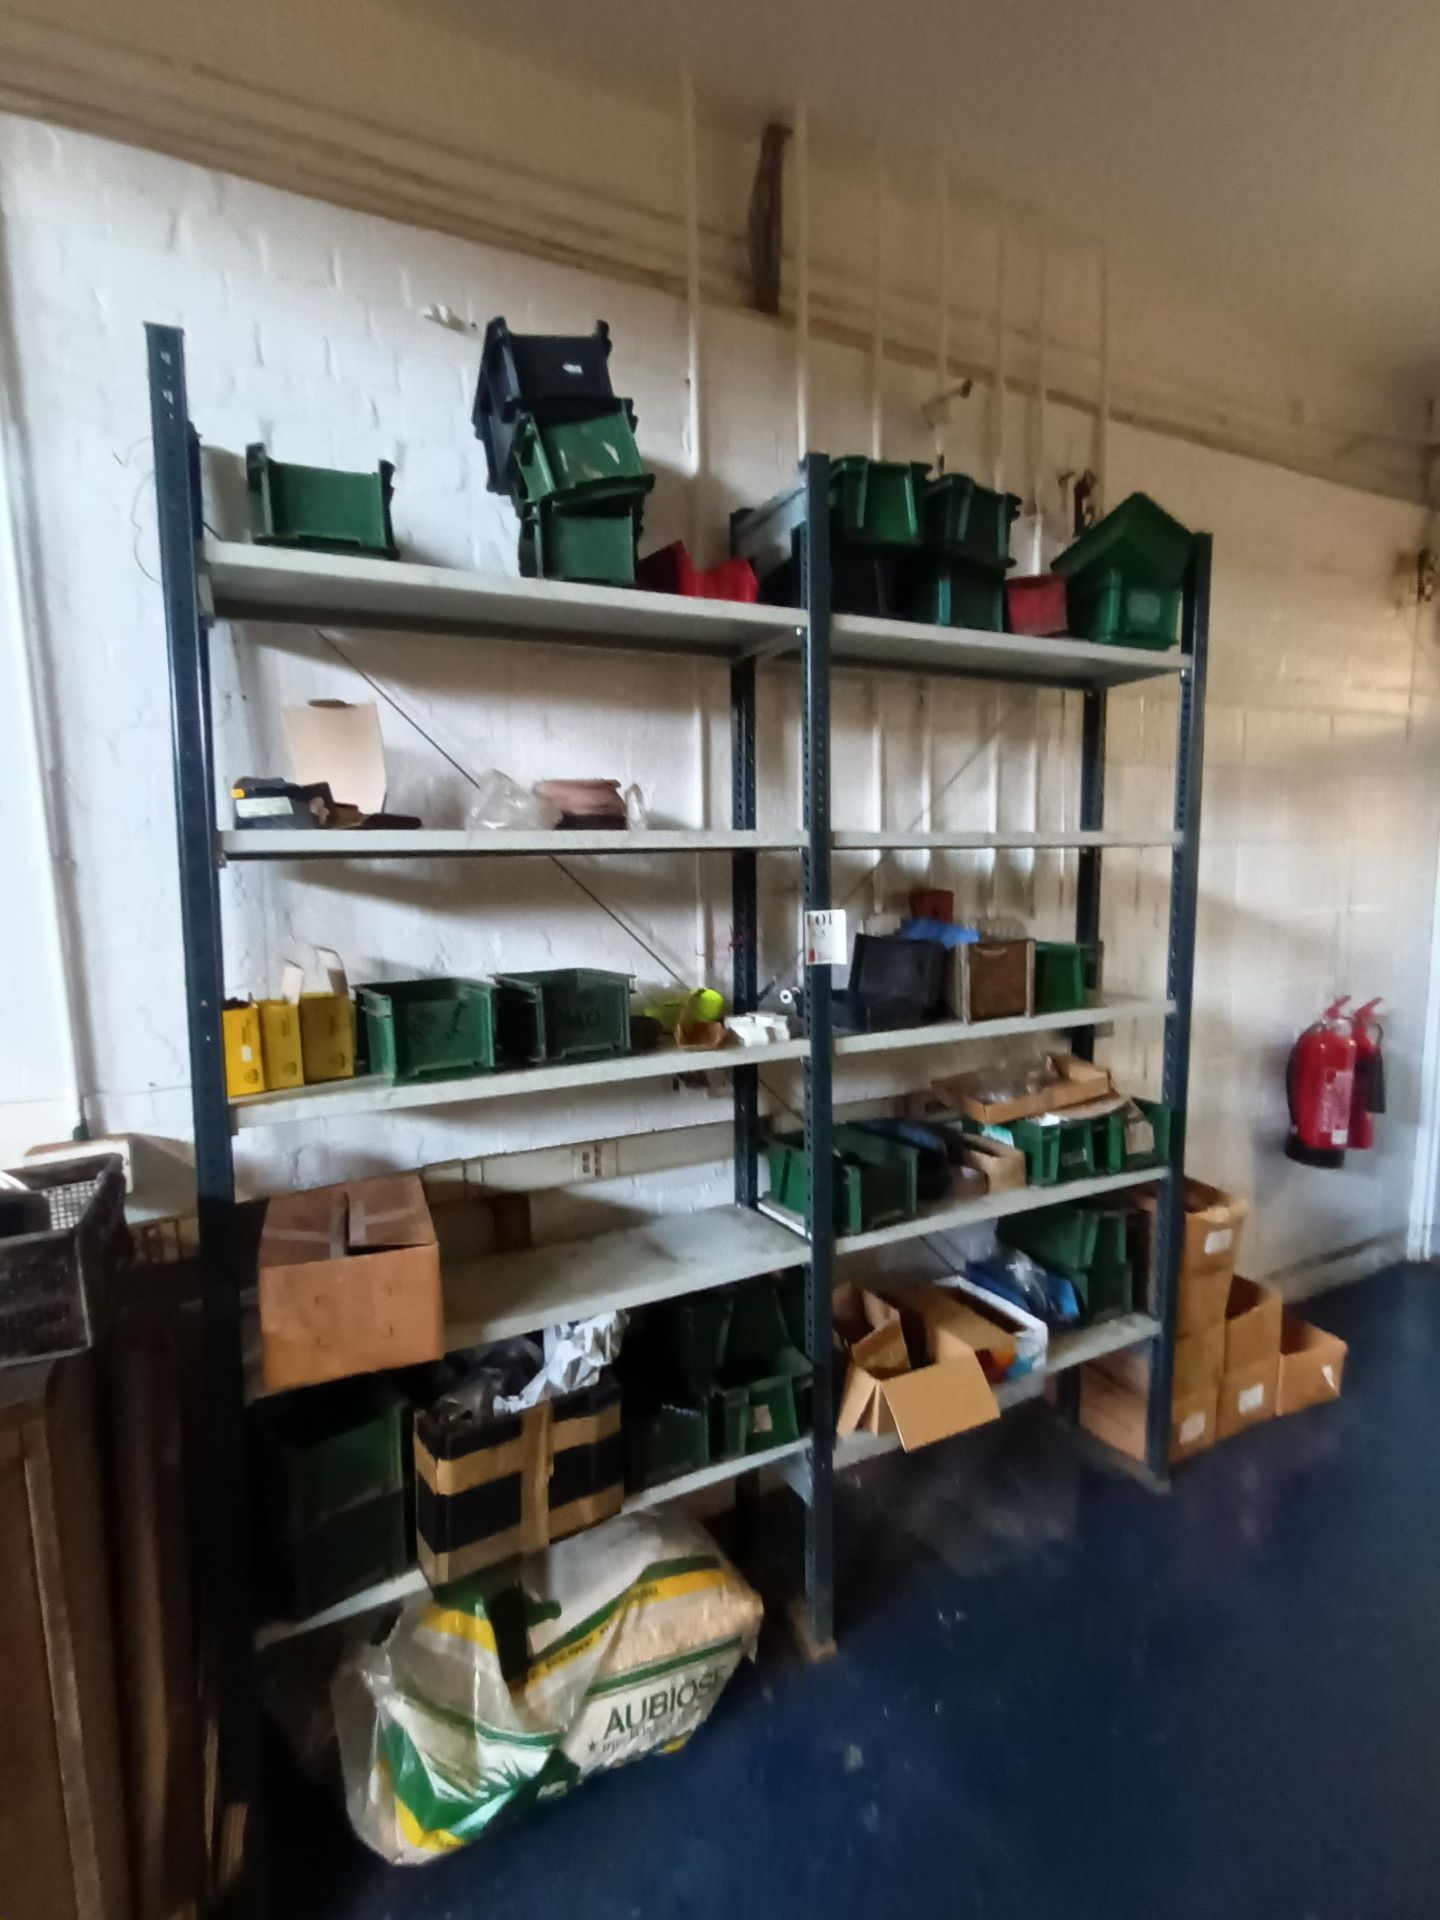 Two bays of boltless steel shelving with contents of assorted fittings